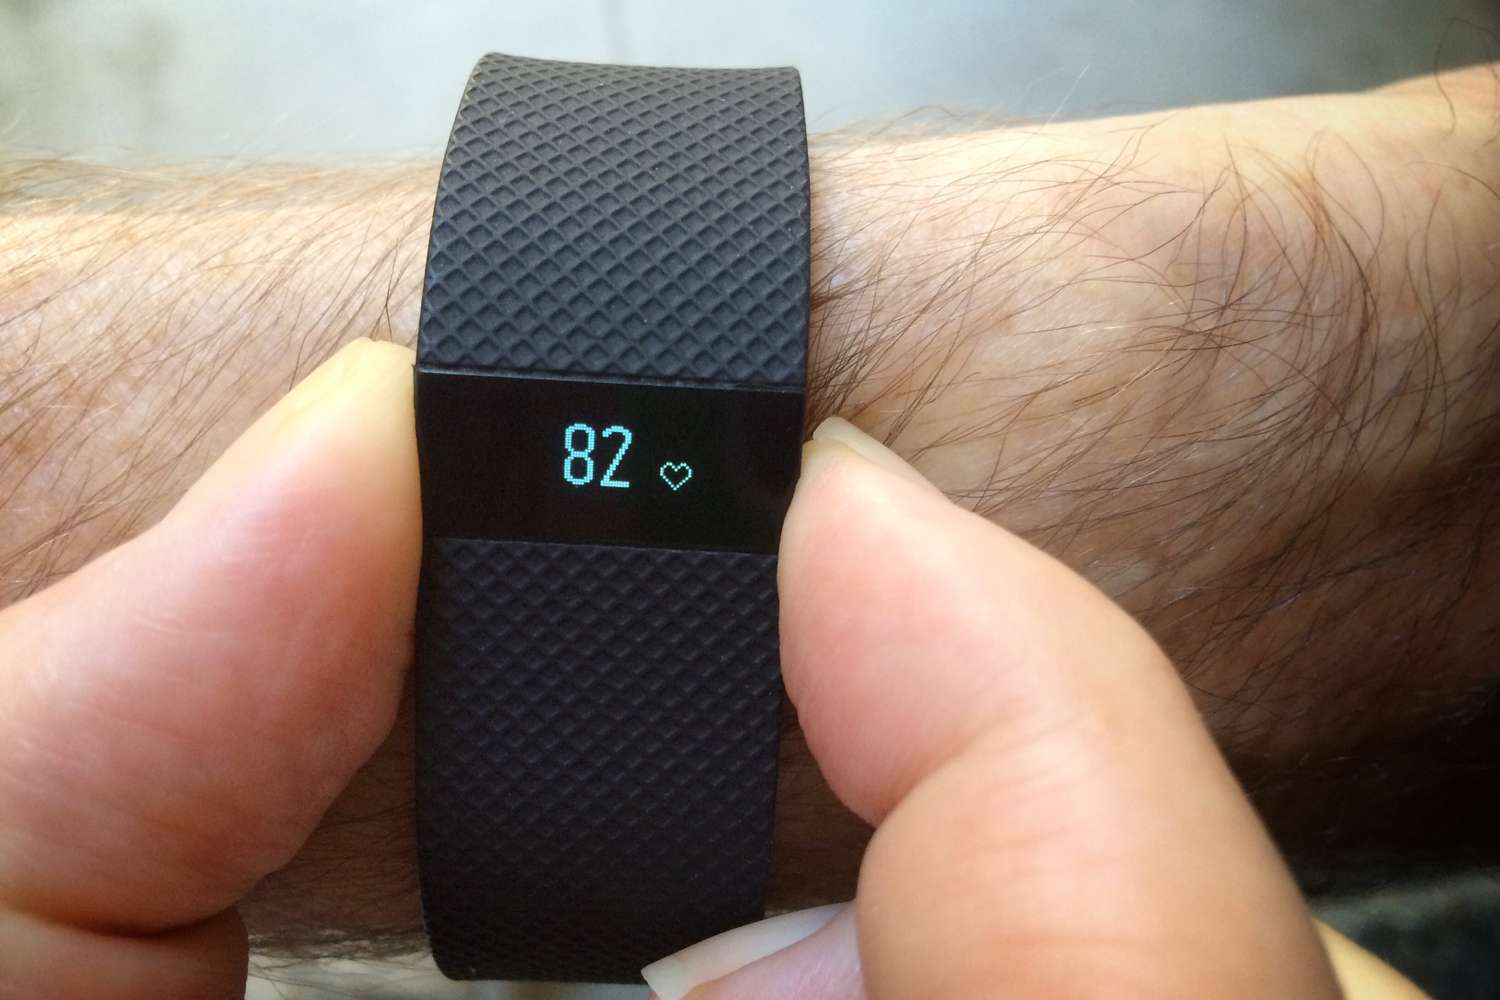 Data Reset: Clearing Data On Your Fitbit Flex